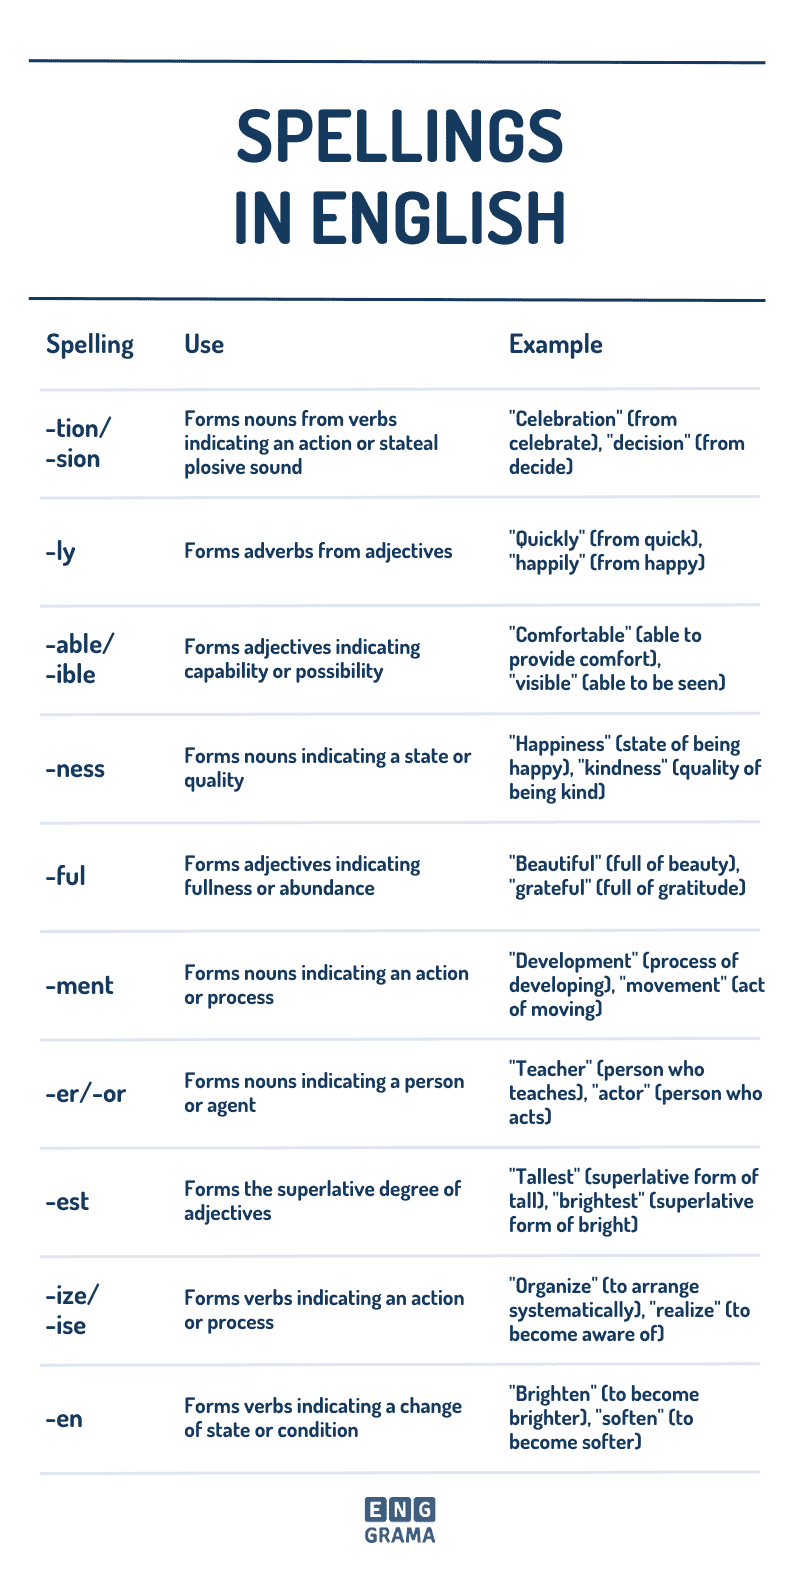 Spellings in English in English with Their Uses and Examples in Sentences - Enggrama